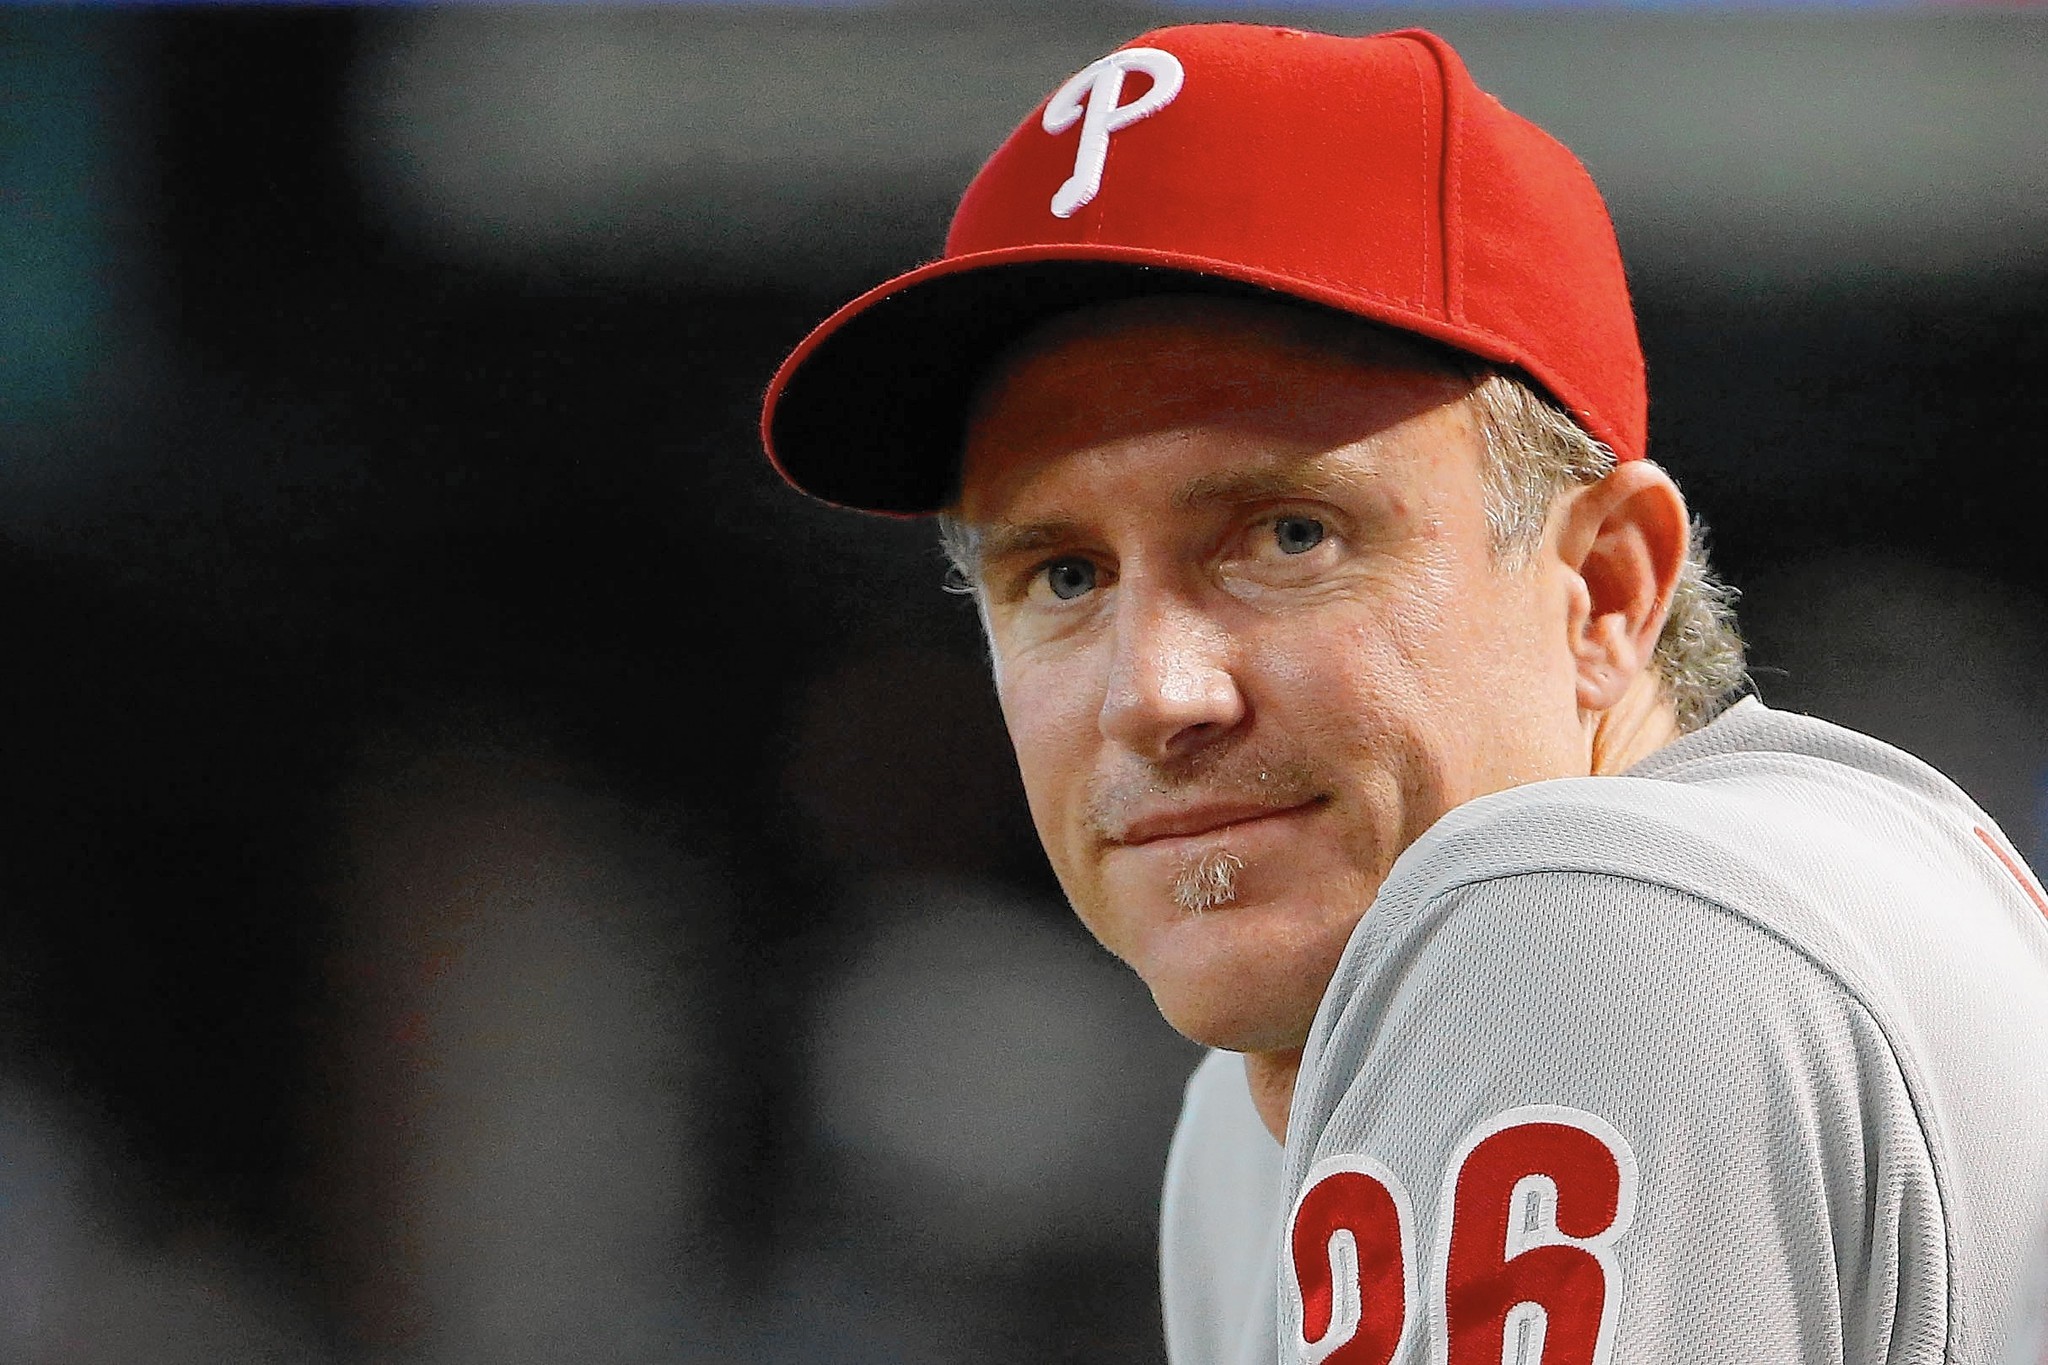 Chase Utley had a great career with the Phillies but it was time to go